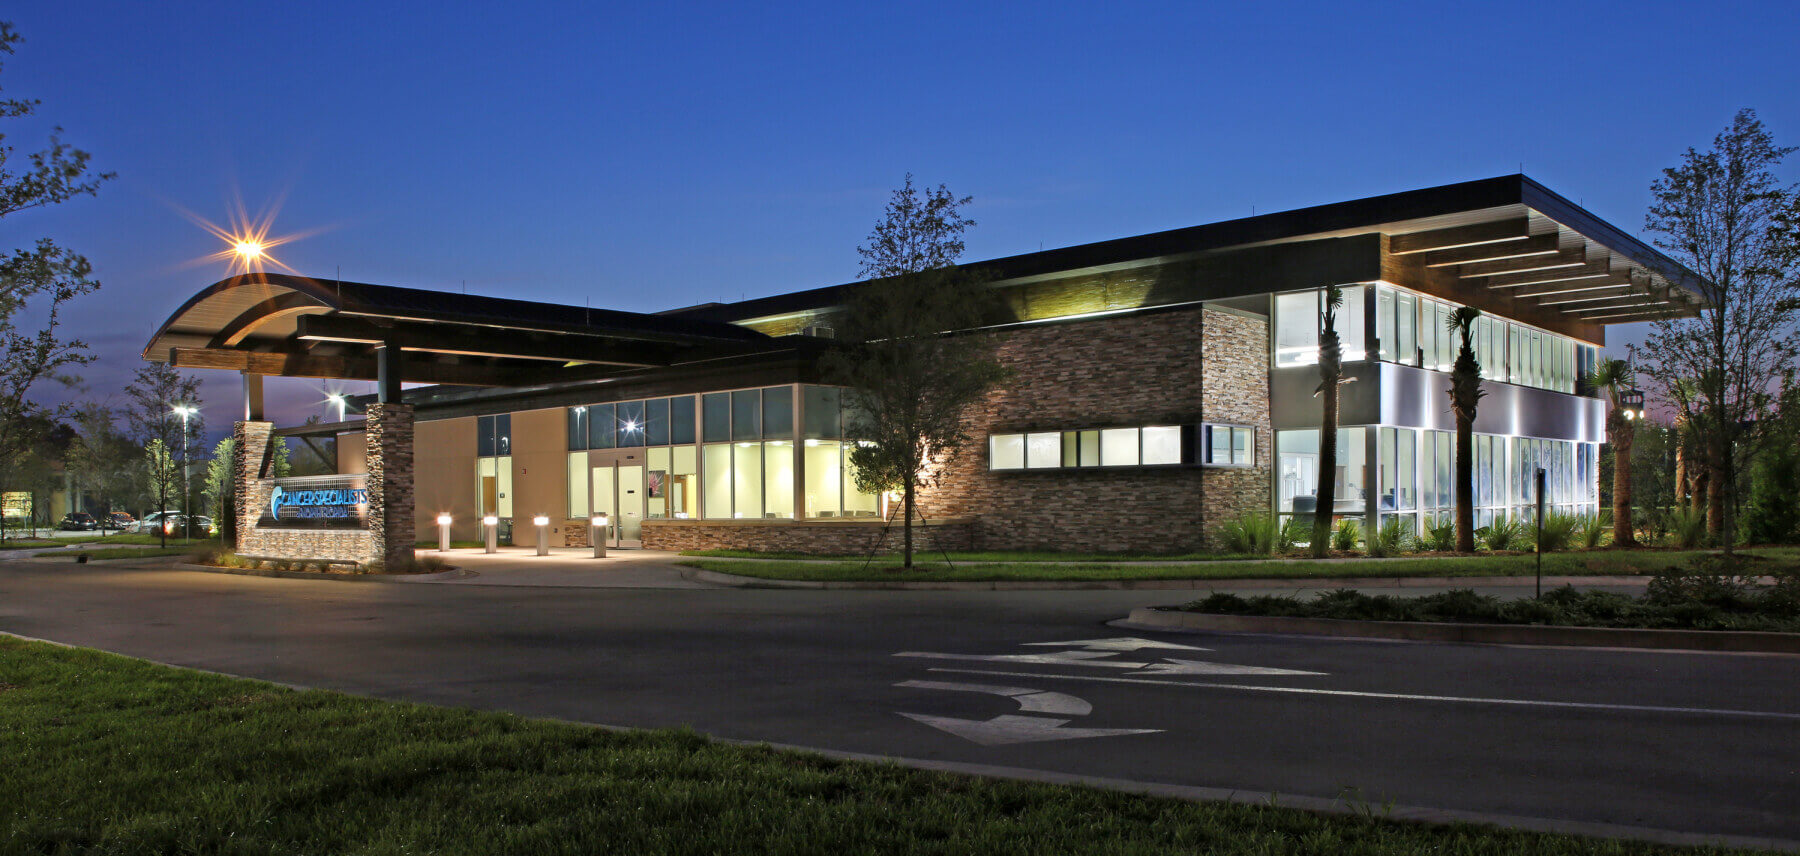 exterior of the facility at night